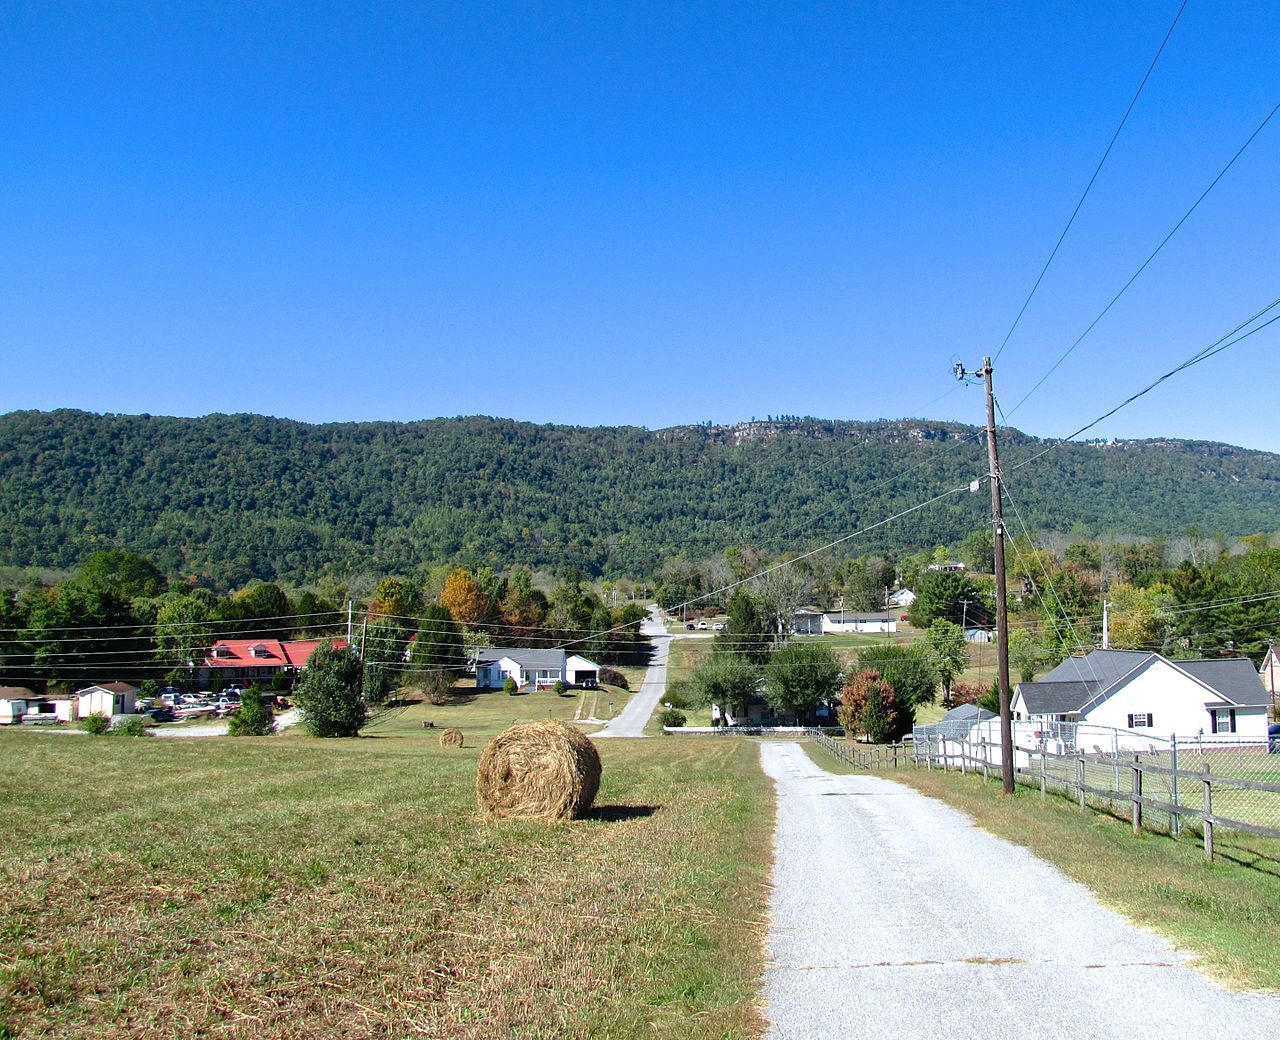 Haus and Hues in Fincastle